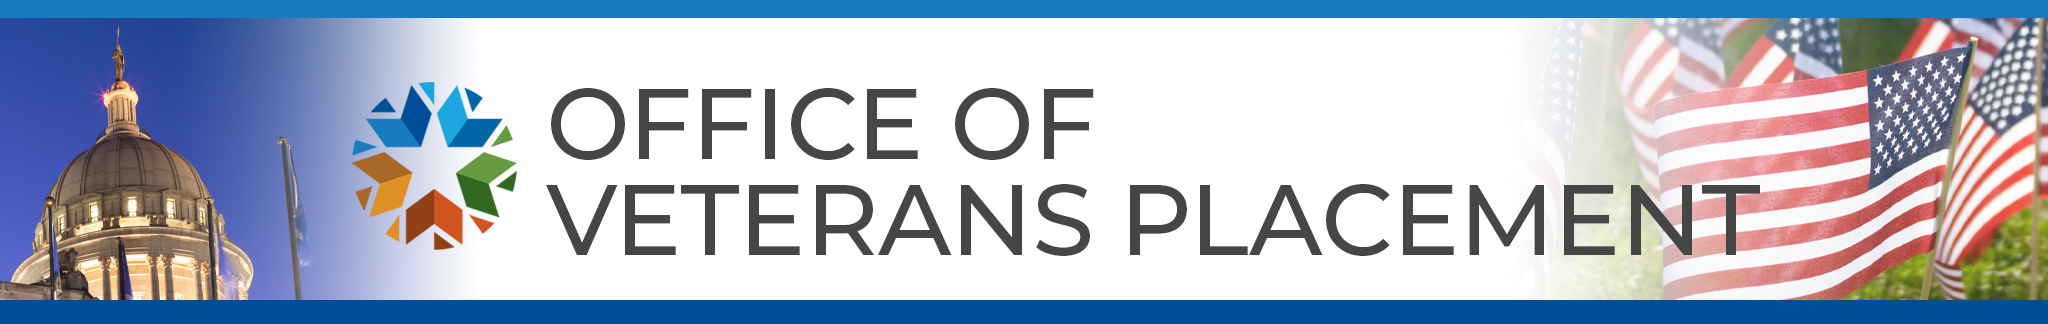 Office of Veterans Placement